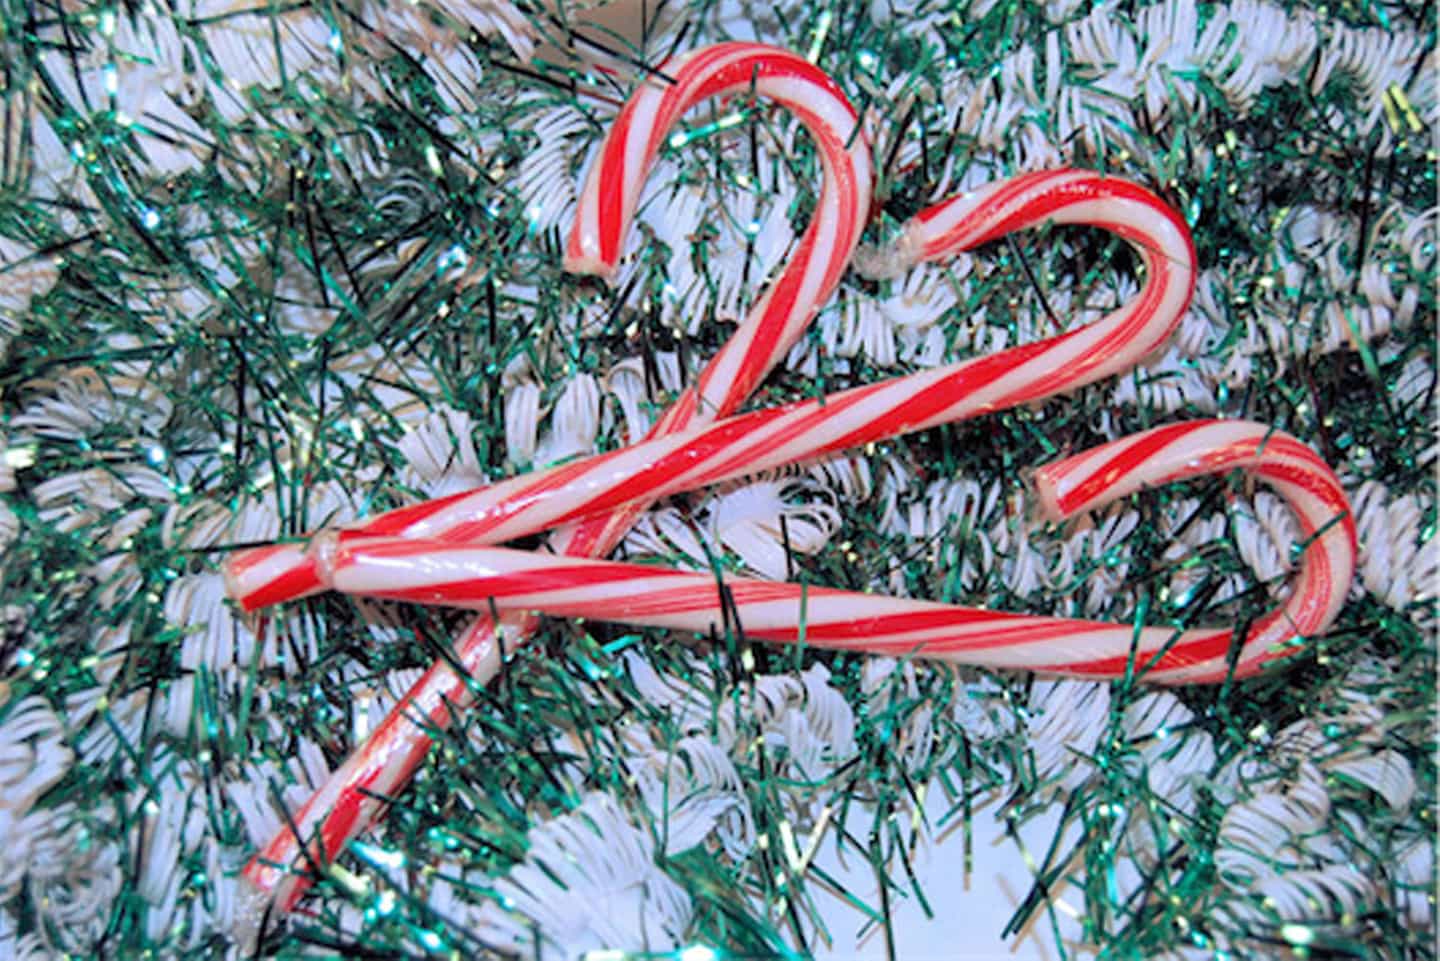 Who invented the Candy Cane?